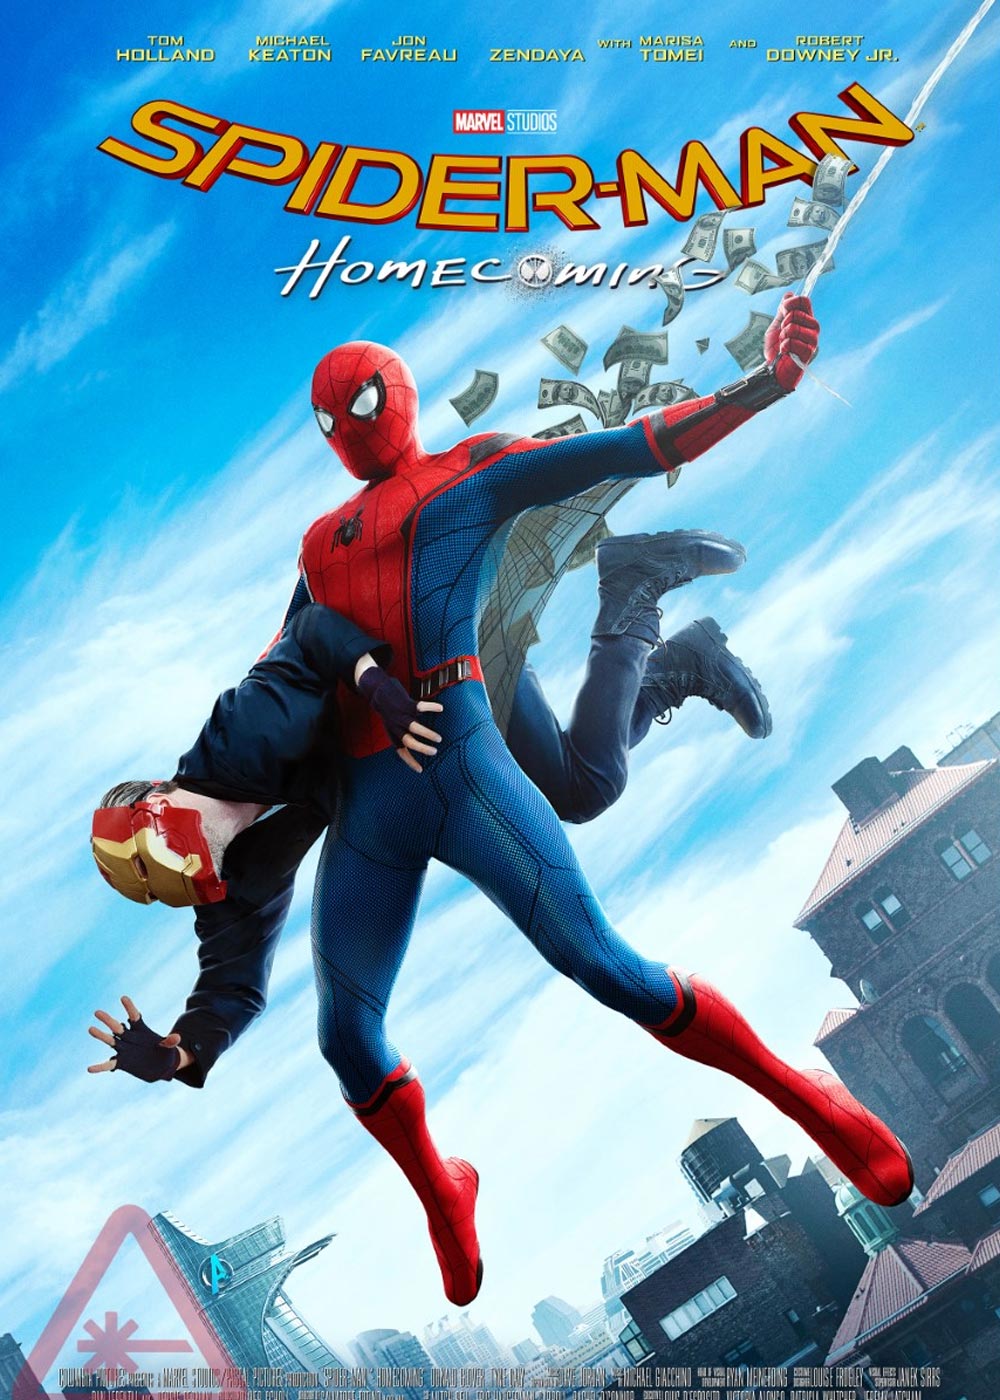 Spider-Man: Homecoming Movie (2017) | Release Date, Review, Cast, Trailer,  Watch Online at Amazon Prime Video, Apple TV (iTunes), Disney+ Hotstar,  Google Play Movies, YouTube, Zee5 - Gadgets 360